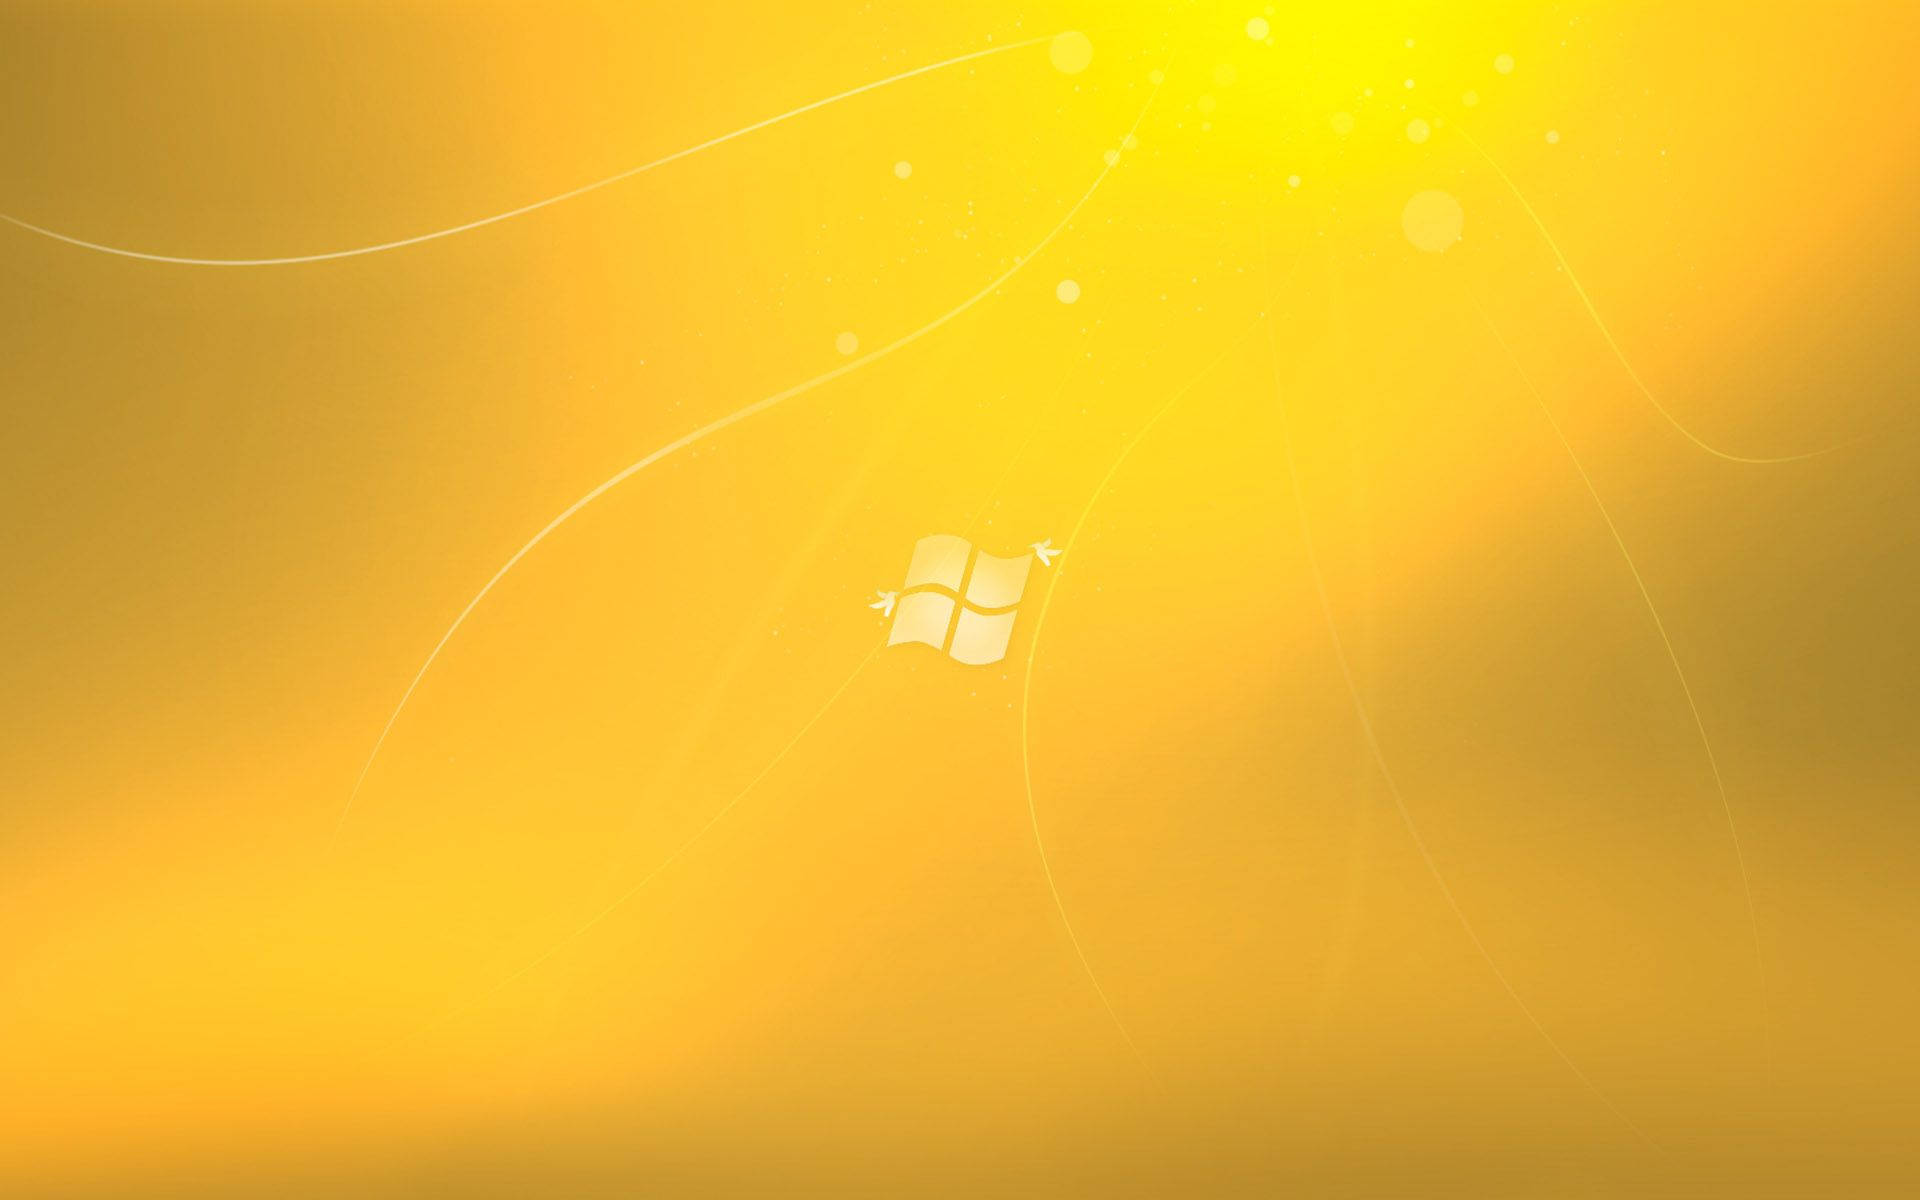 Windows 10 1920X1200 Wallpaper and Background Image